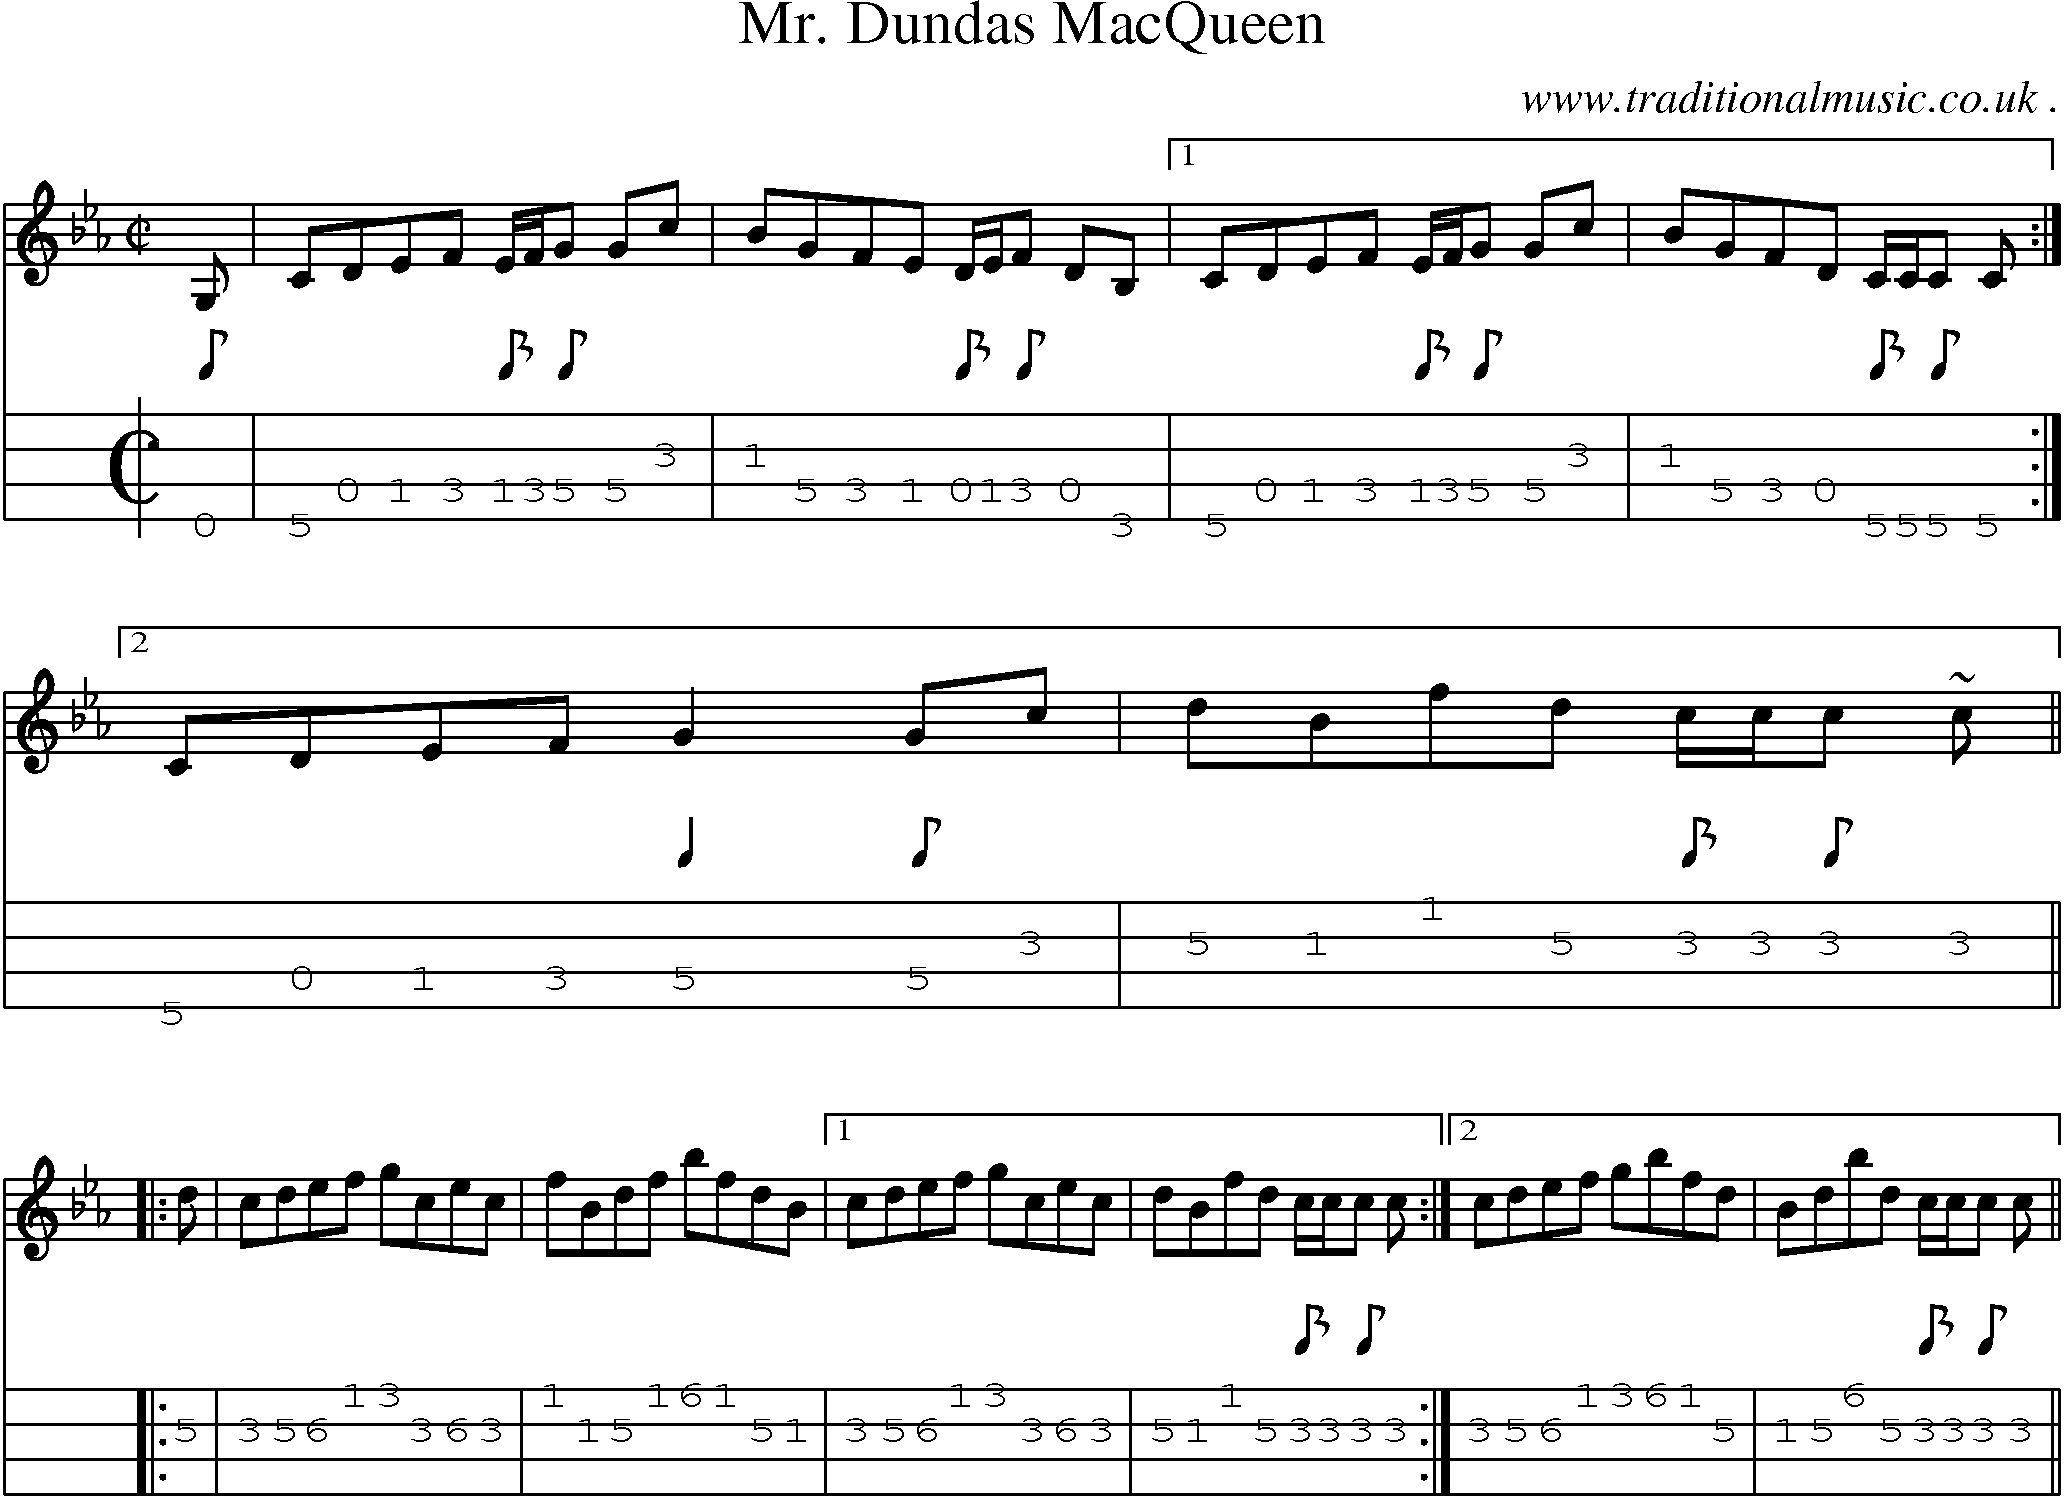 Sheet-music  score, Chords and Mandolin Tabs for Mr Dundas Macqueen